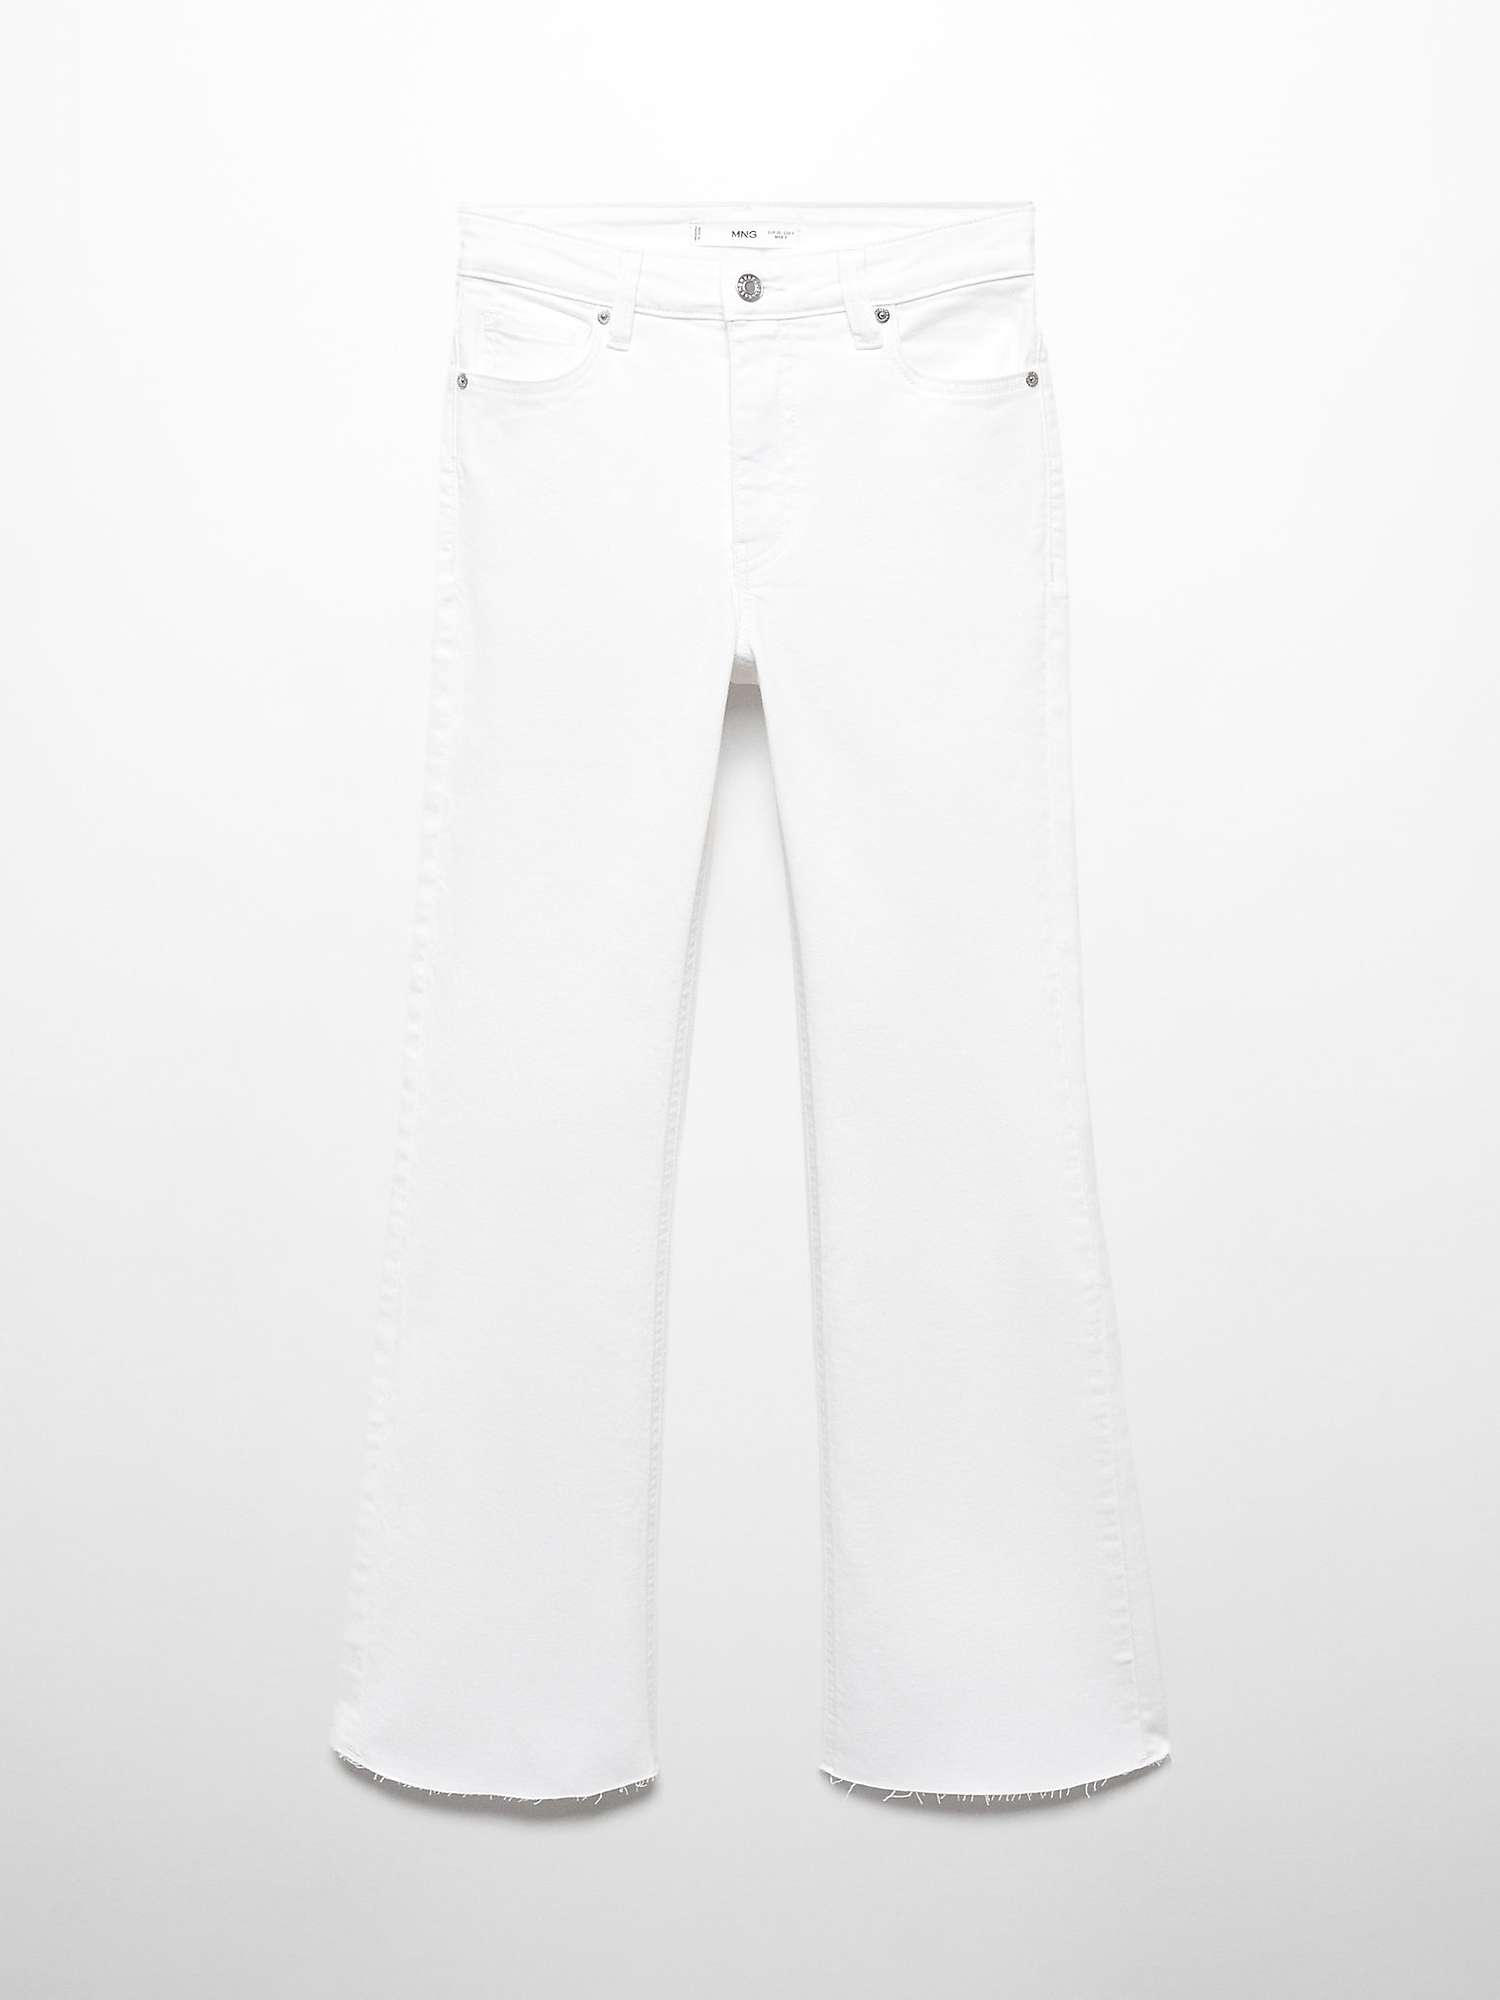 Buy Mango Sienna Cropped Flared Jeans Online at johnlewis.com